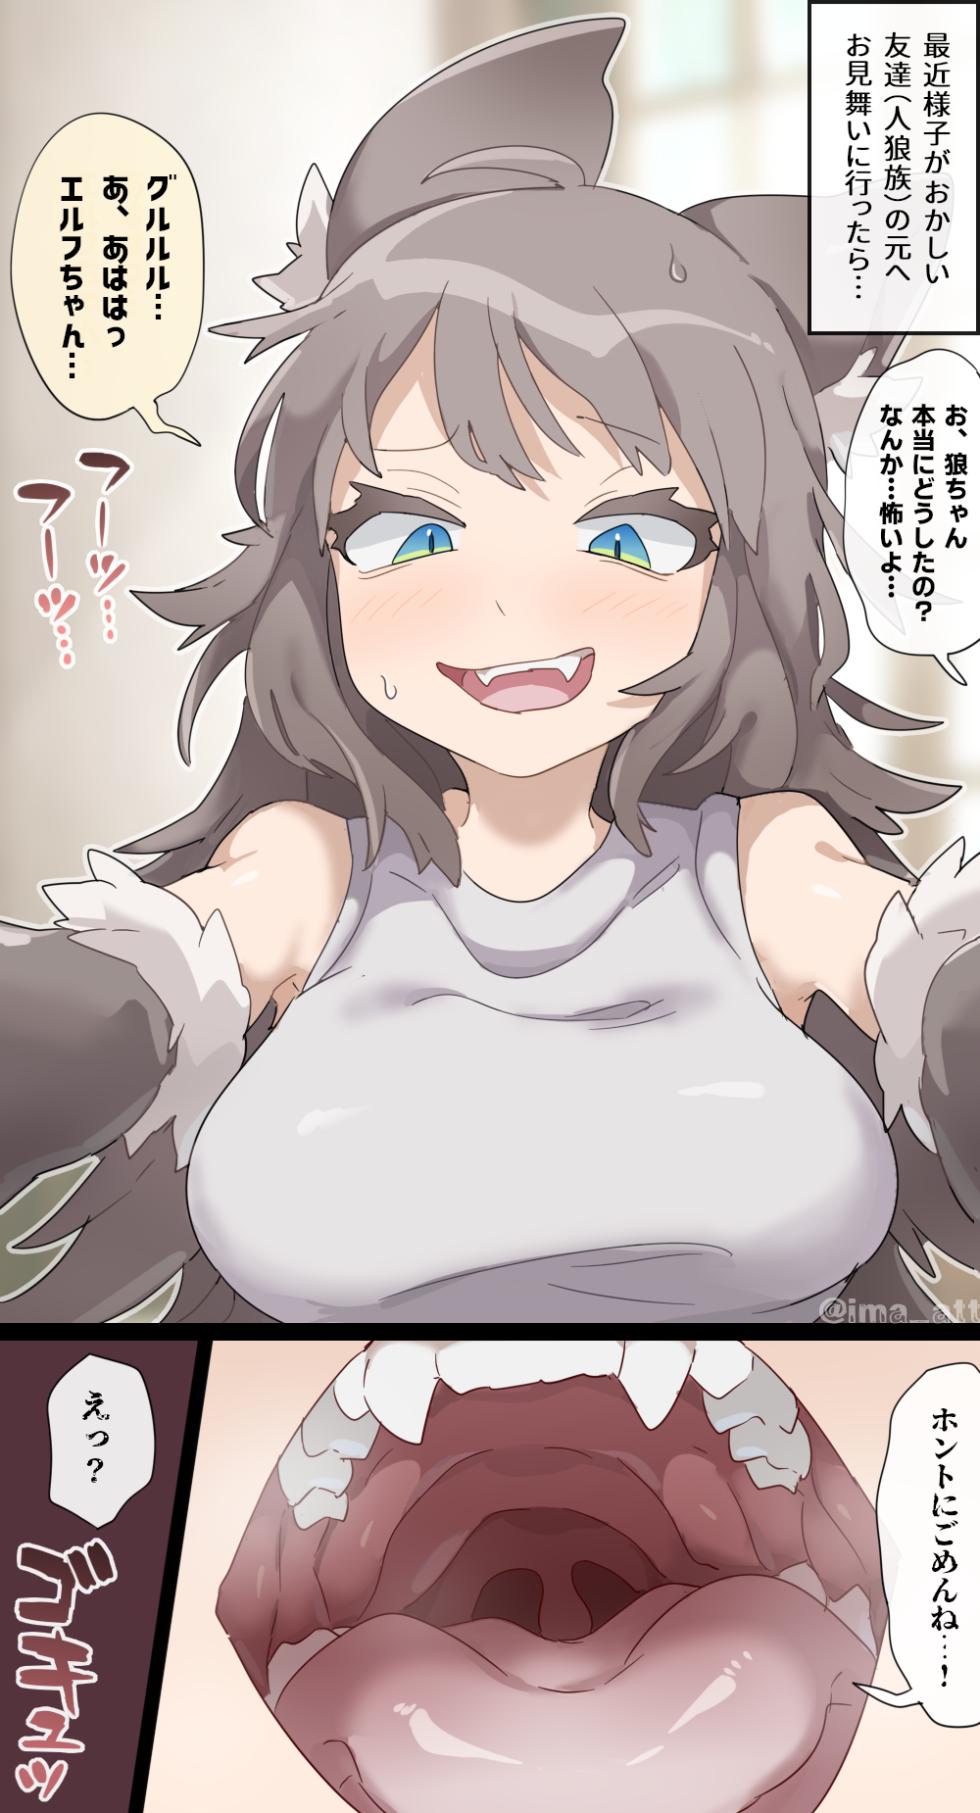 [imaat] Wolf Woman SAME SIZE VORE [English / Japanese] - Page 8